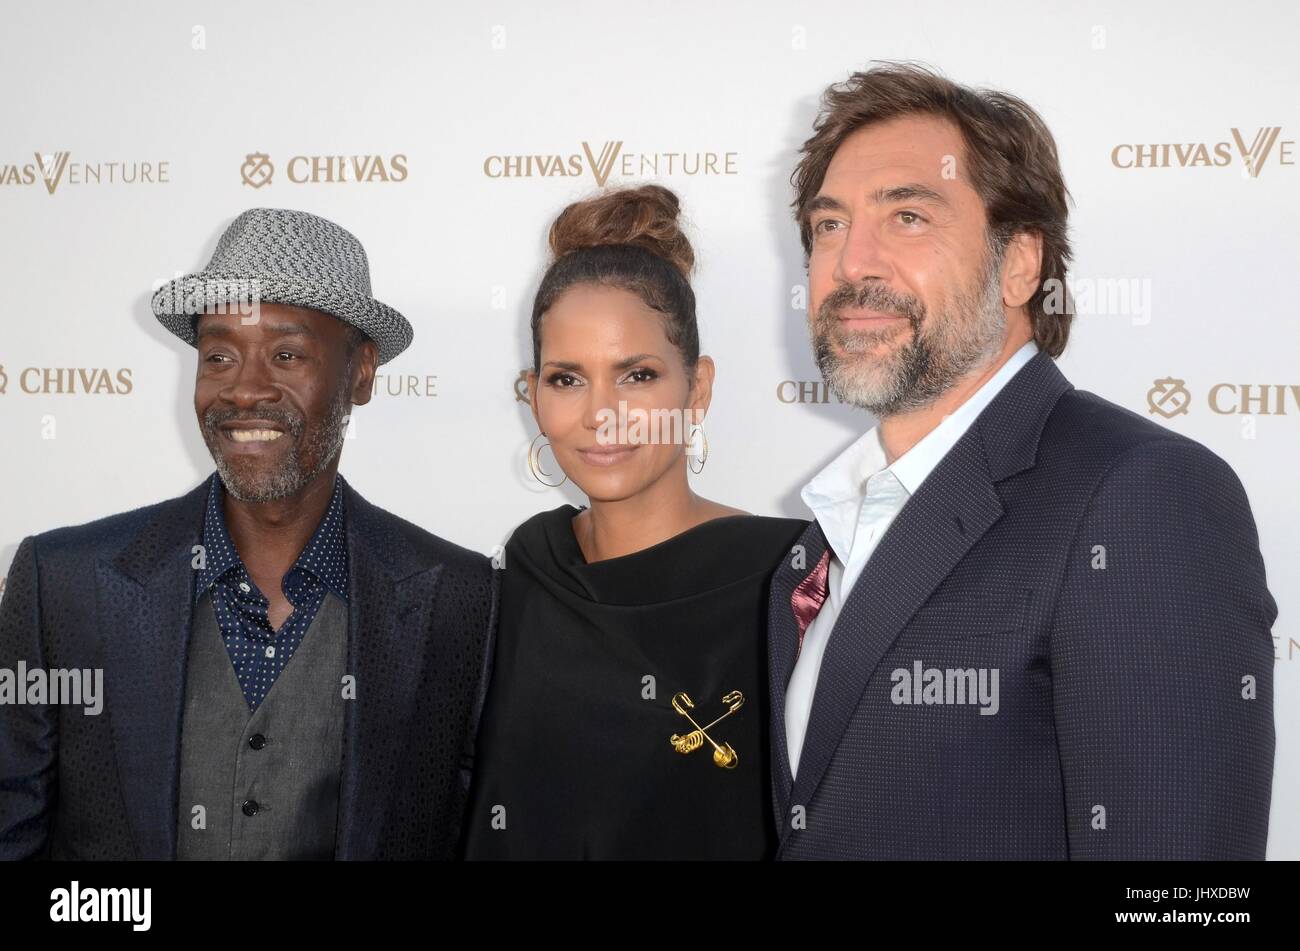 Los Angeles, CA, USA. 13th July, 2017. Don Cheadle, Halle Berry, Javier Bardem at arrivals for Chivas Regal's Win The Right Way Campaign and The Final Pitch of The Venture Party, LADC Studios, Los Angeles, CA July 13, 2017. Credit: Priscilla Grant/Everett Collection/Alamy Live News Stock Photo